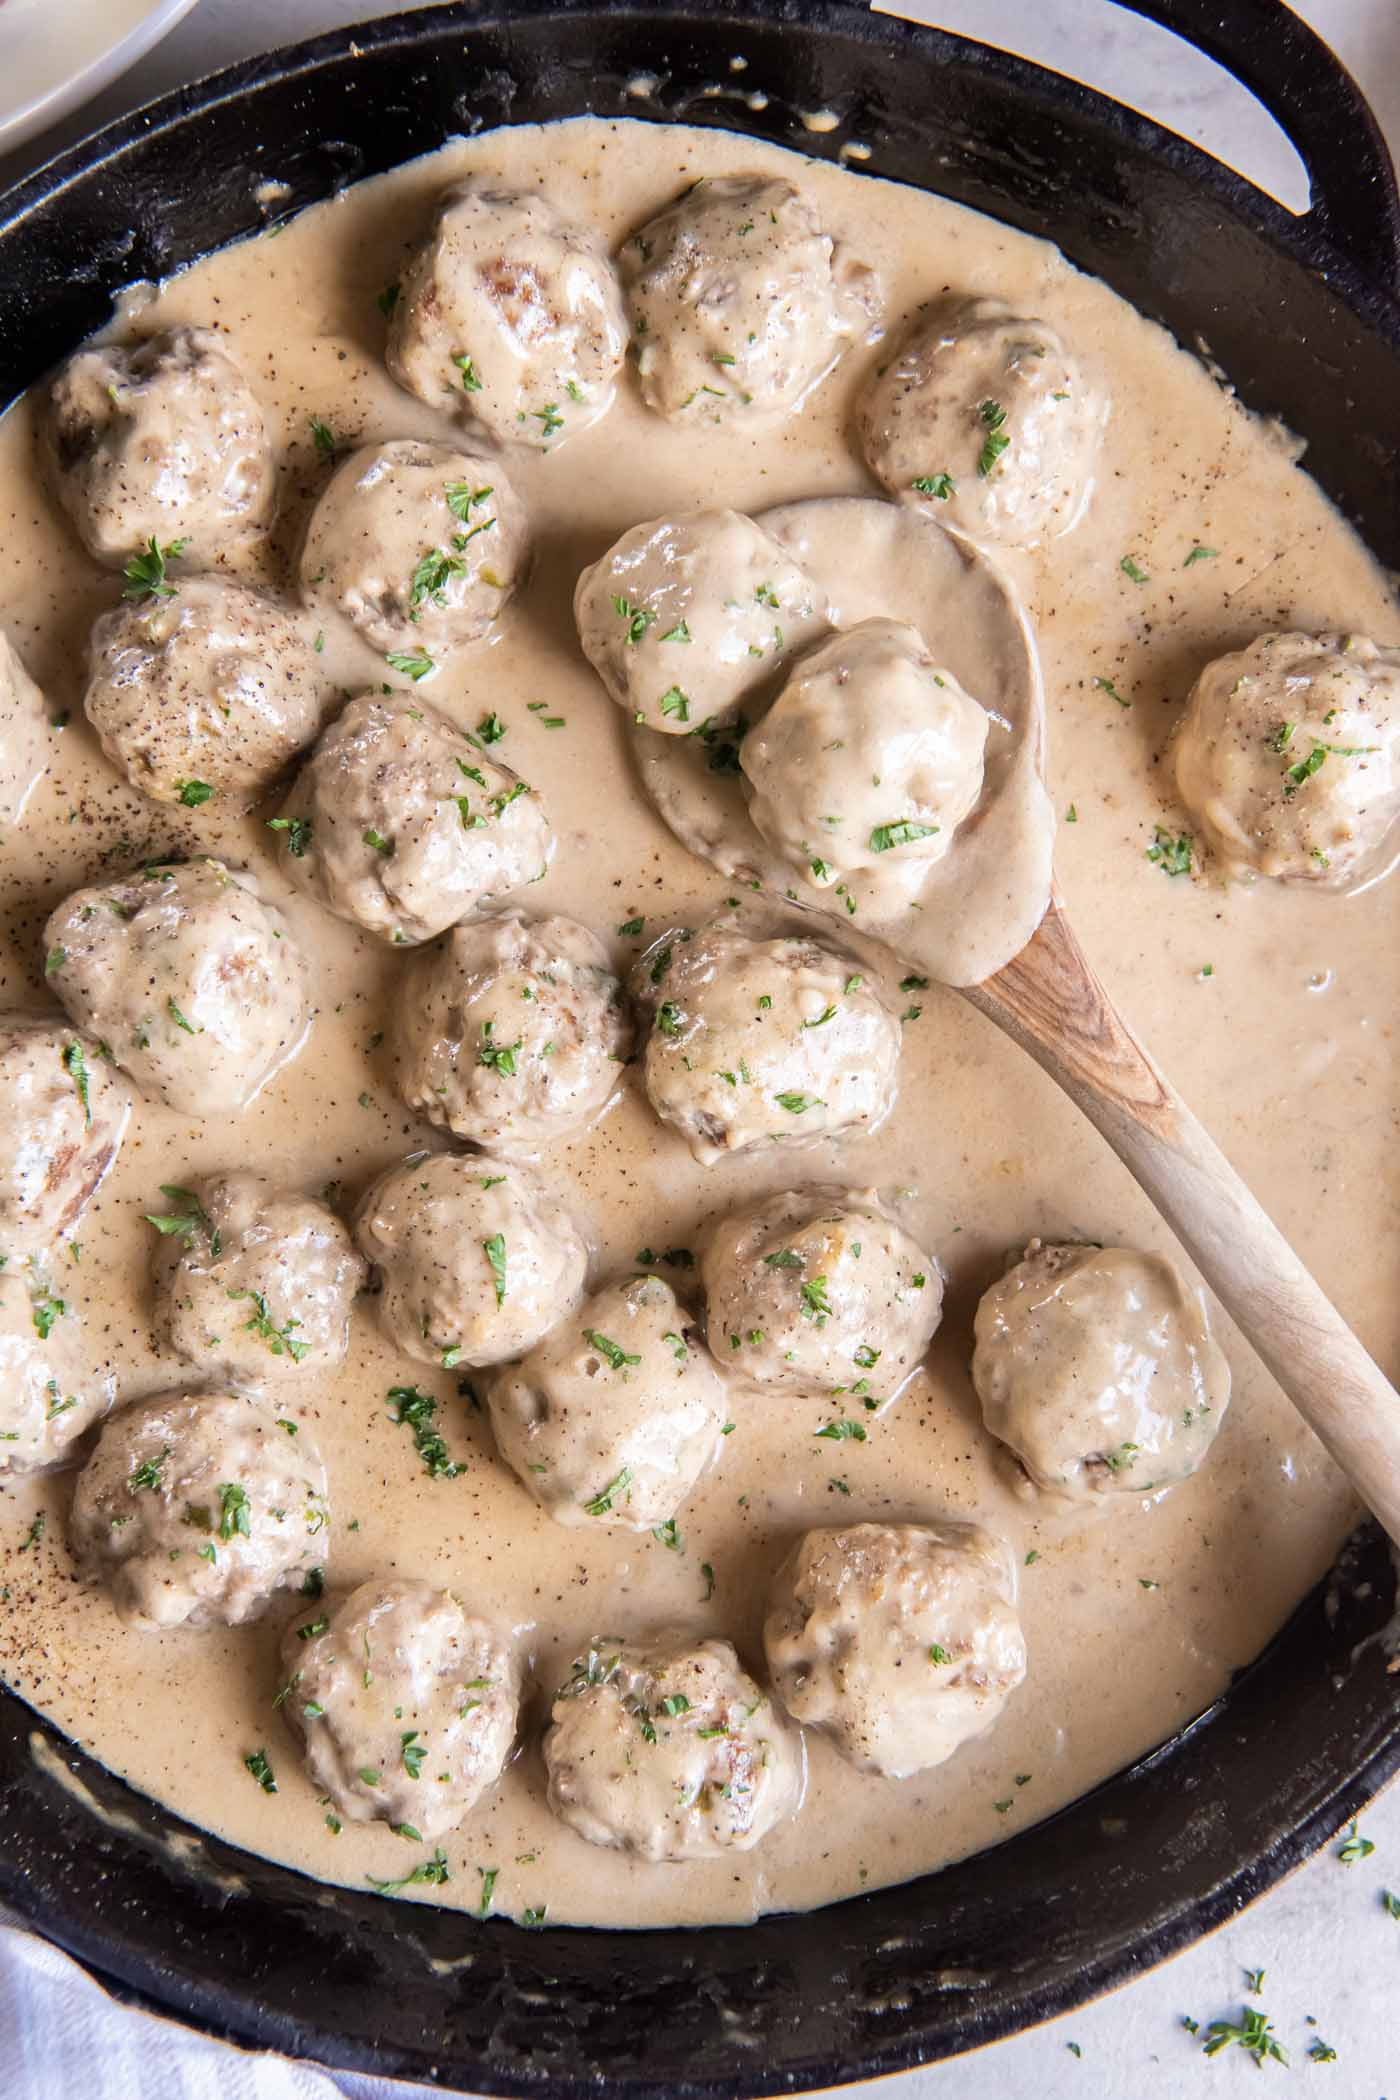 Swedish meatballs and sauce in a cast iron skillet with a wooden spoon.